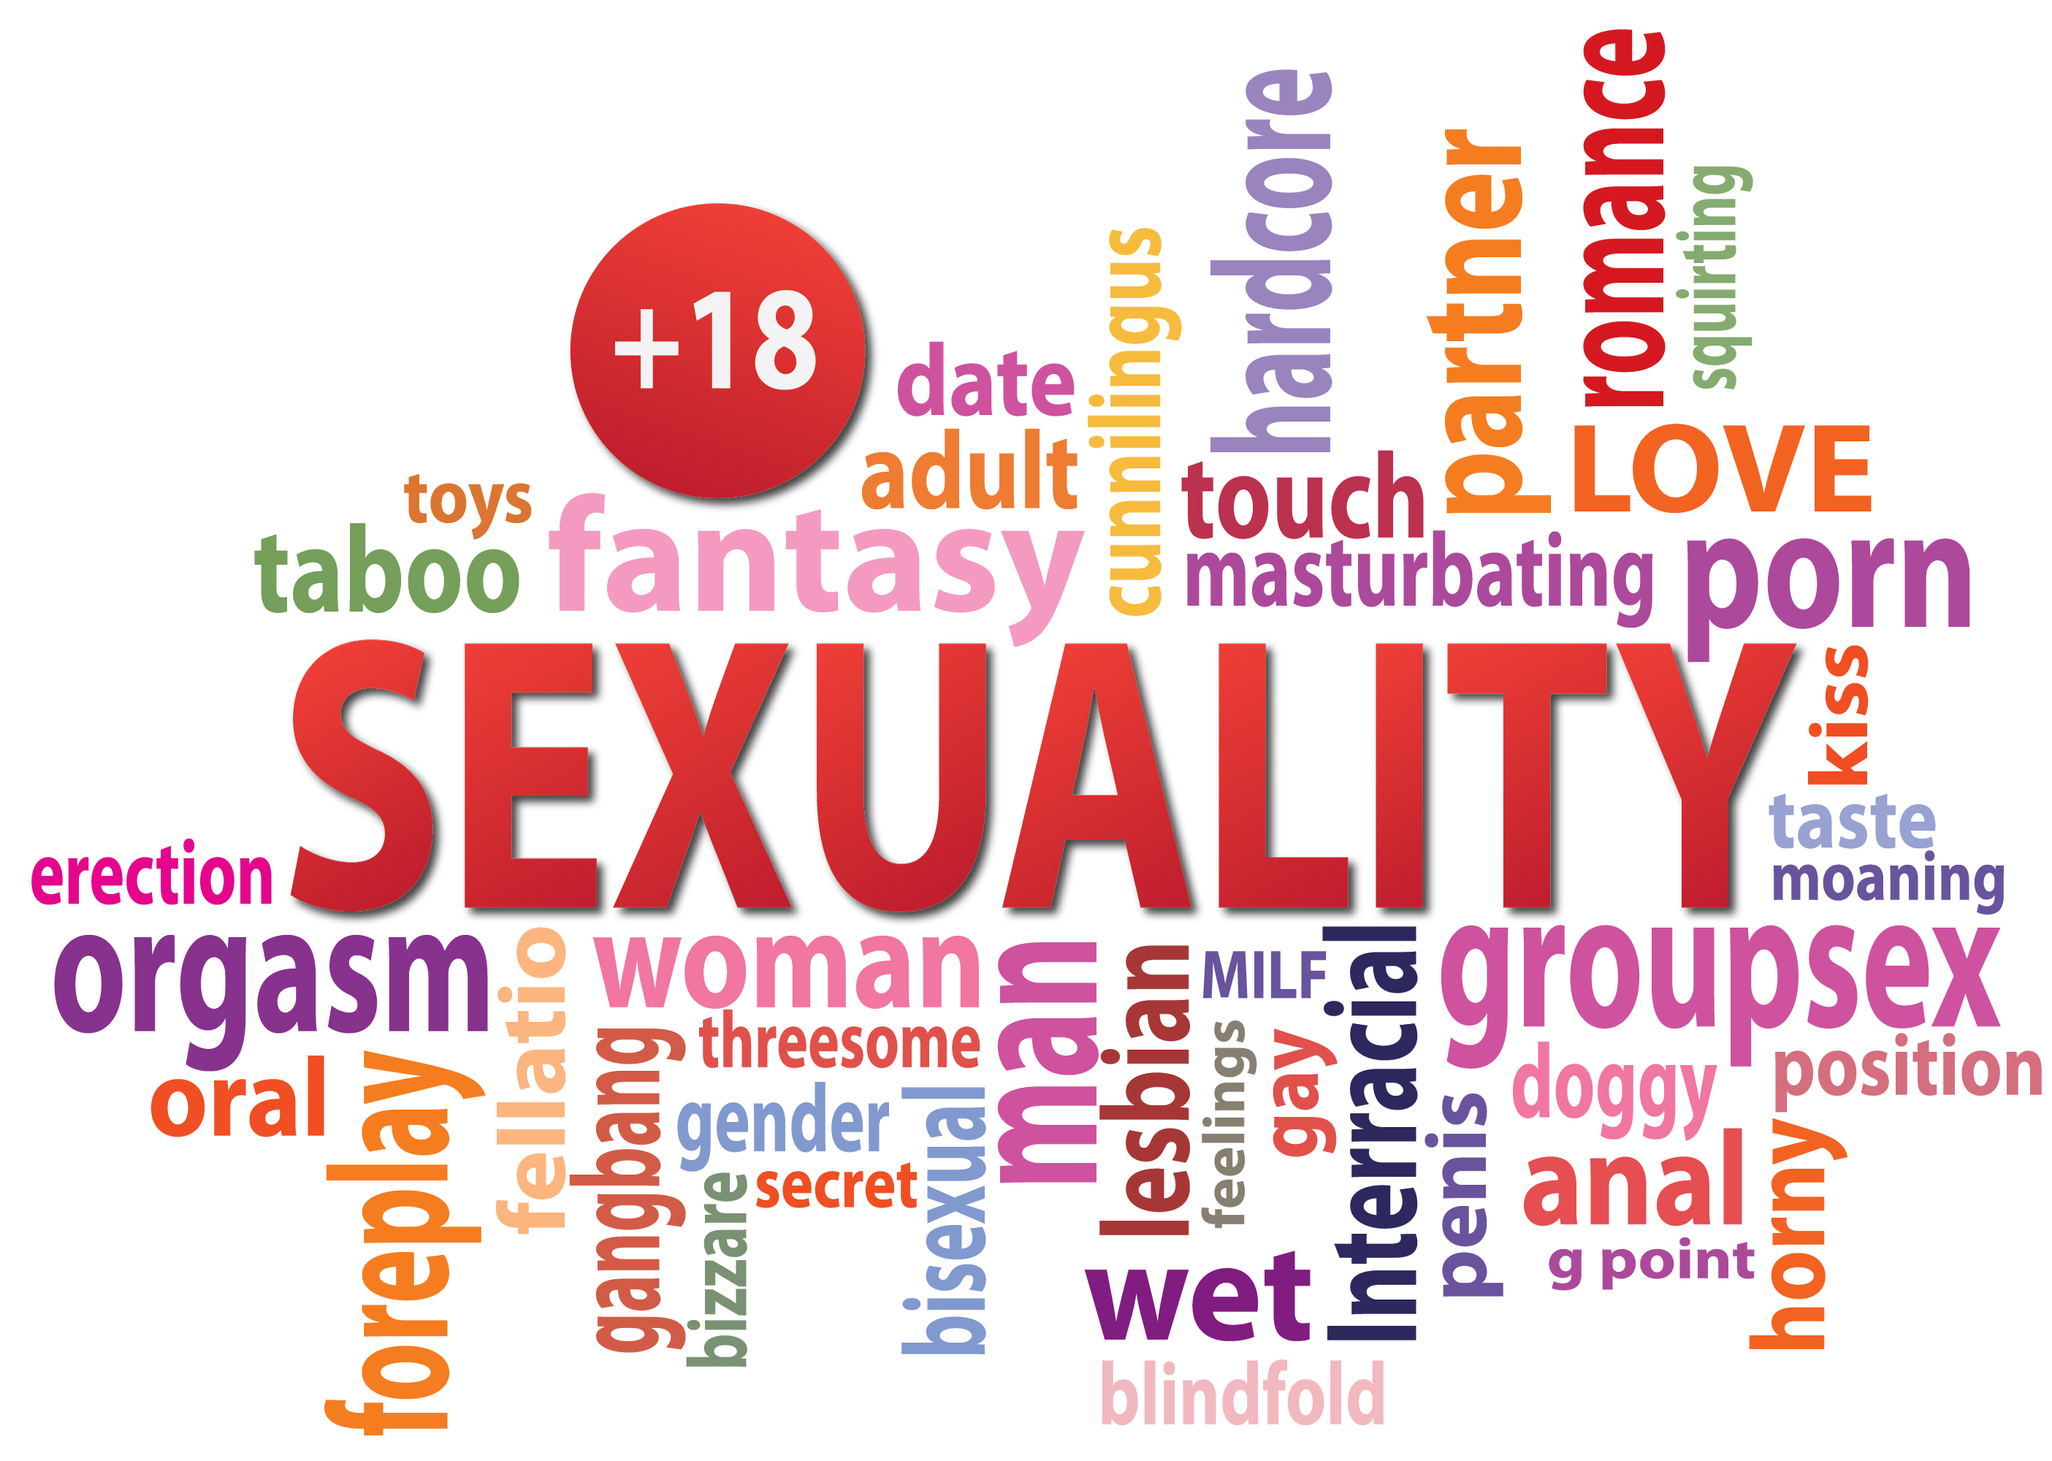 Sexuality And Its Impact On Our Values